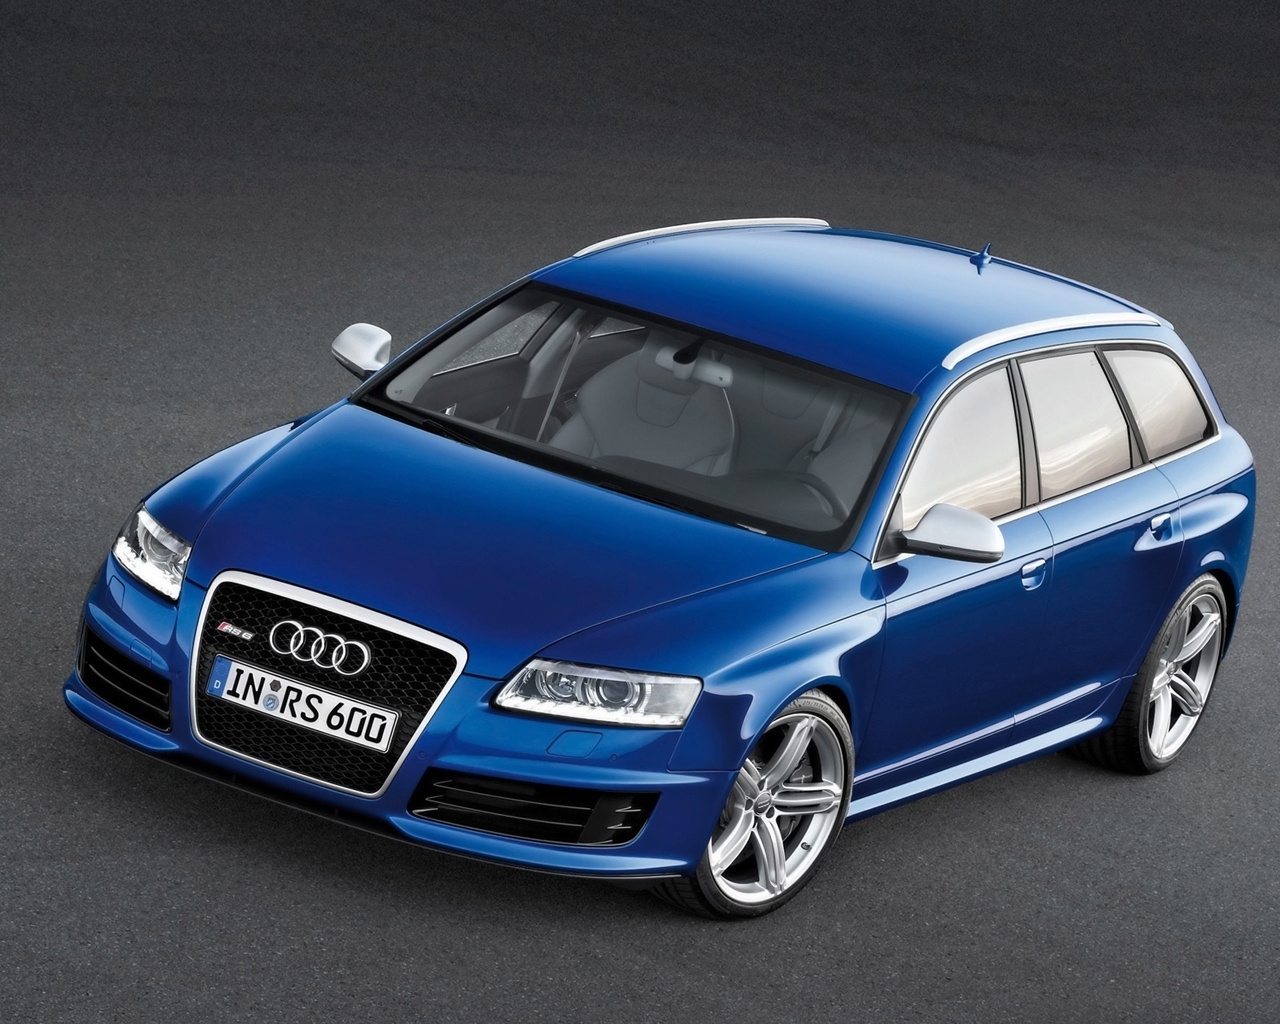 Audi RS6 Avant Front And Side 2008 for 1280 x 1024 resolution